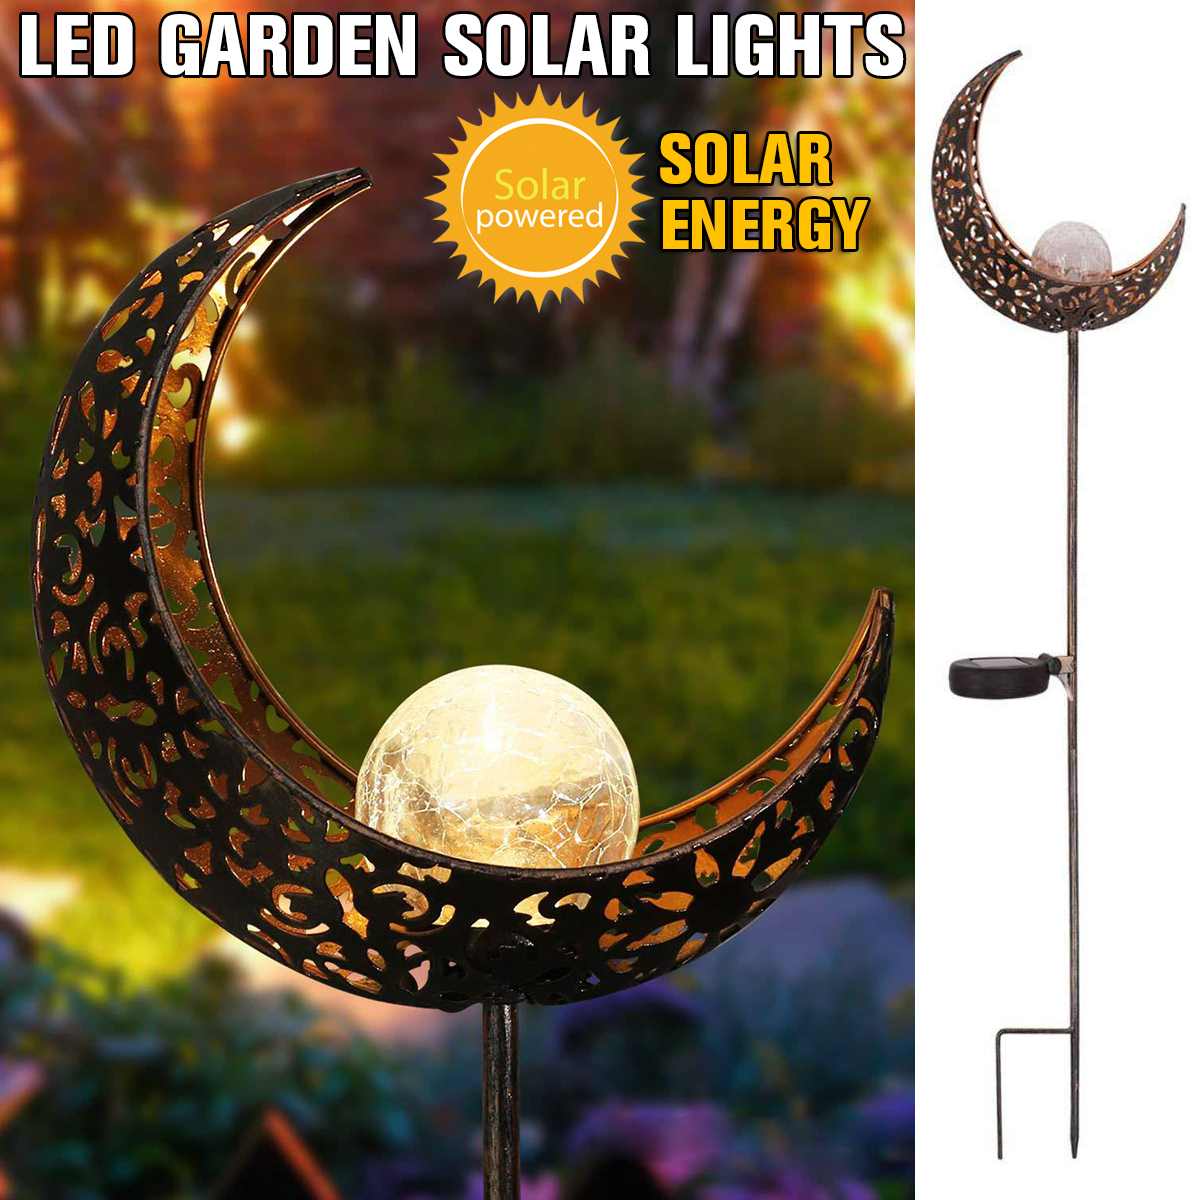 Waterproof Hollow Out Moon LED Garden Solar Lights LED Lantern Hanging Outdoor Solar Lamp Flame Effect Solar Decorative